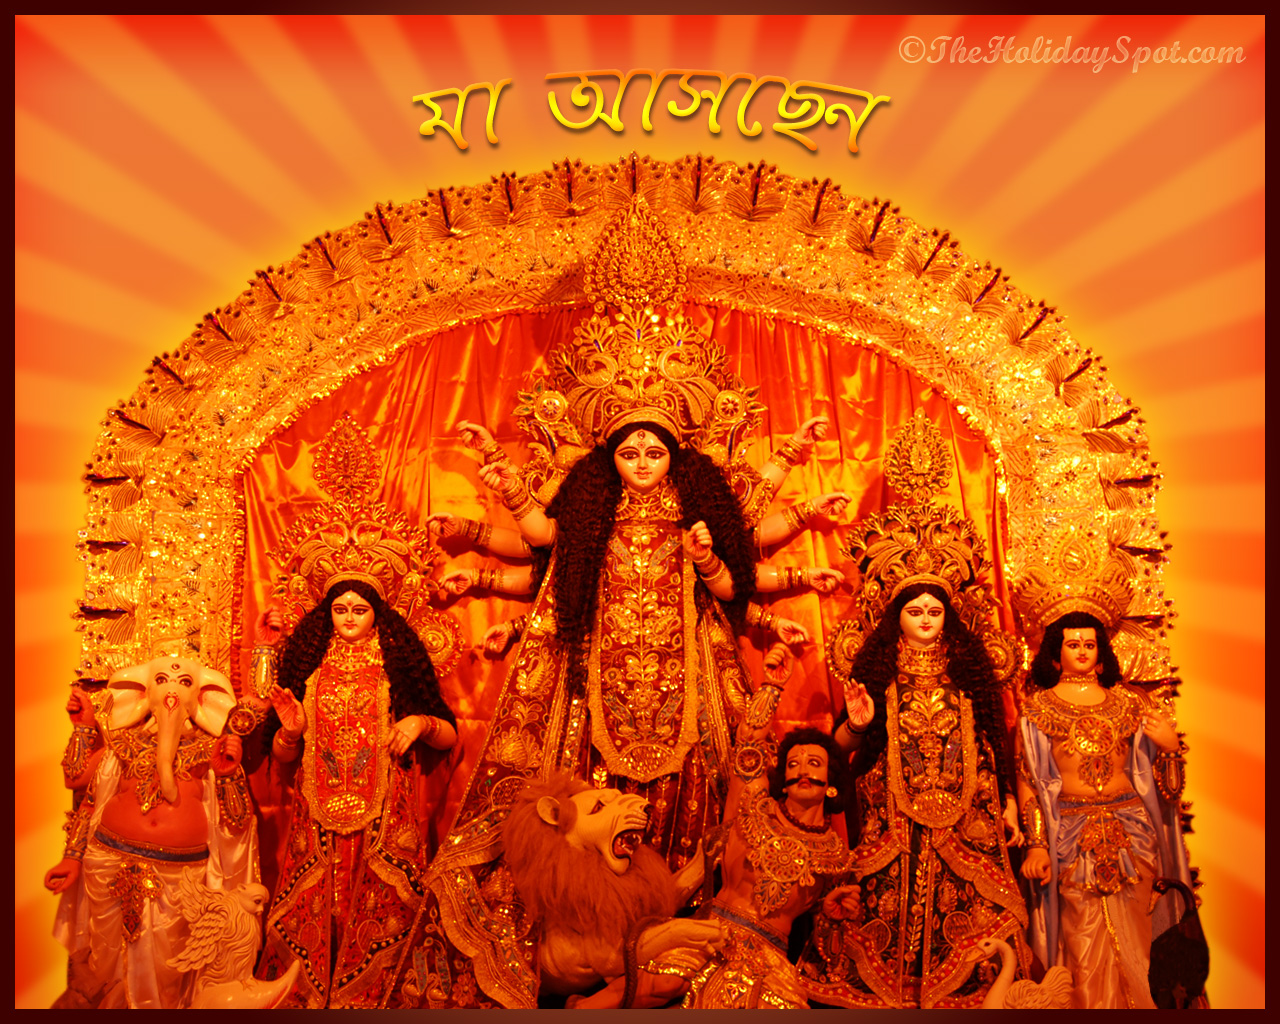 Wallpapers for Durga puja, its free, download now!.